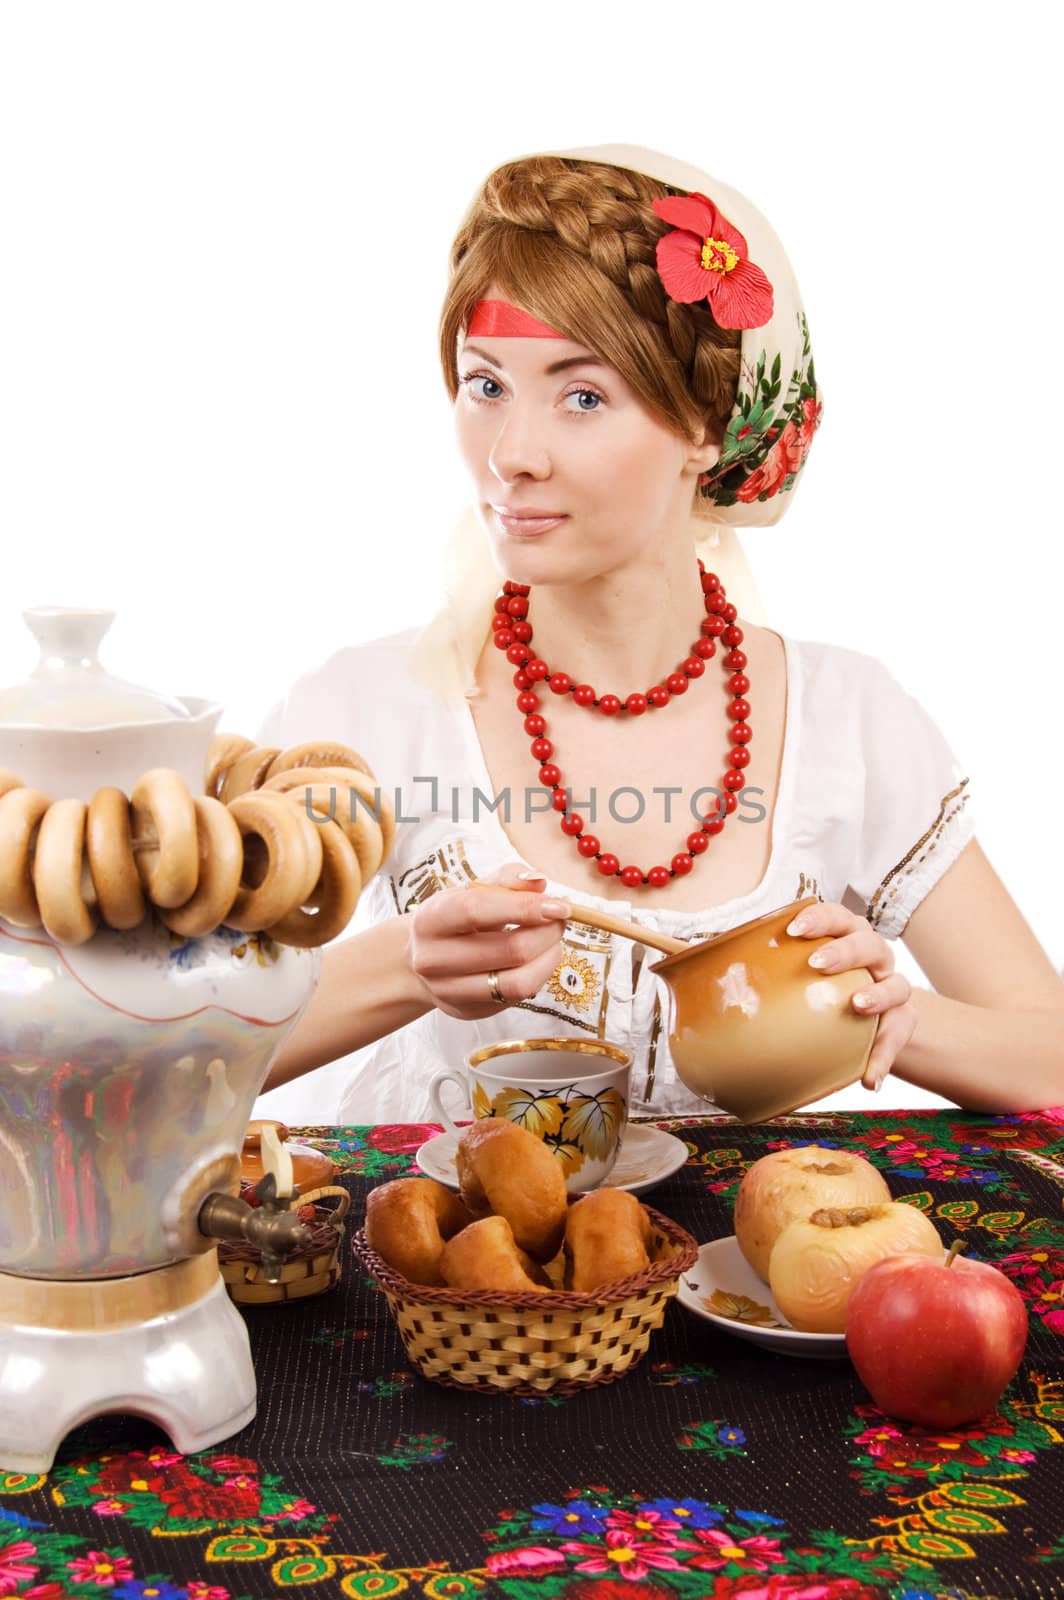 Russian woman drinking tea with samovar over white